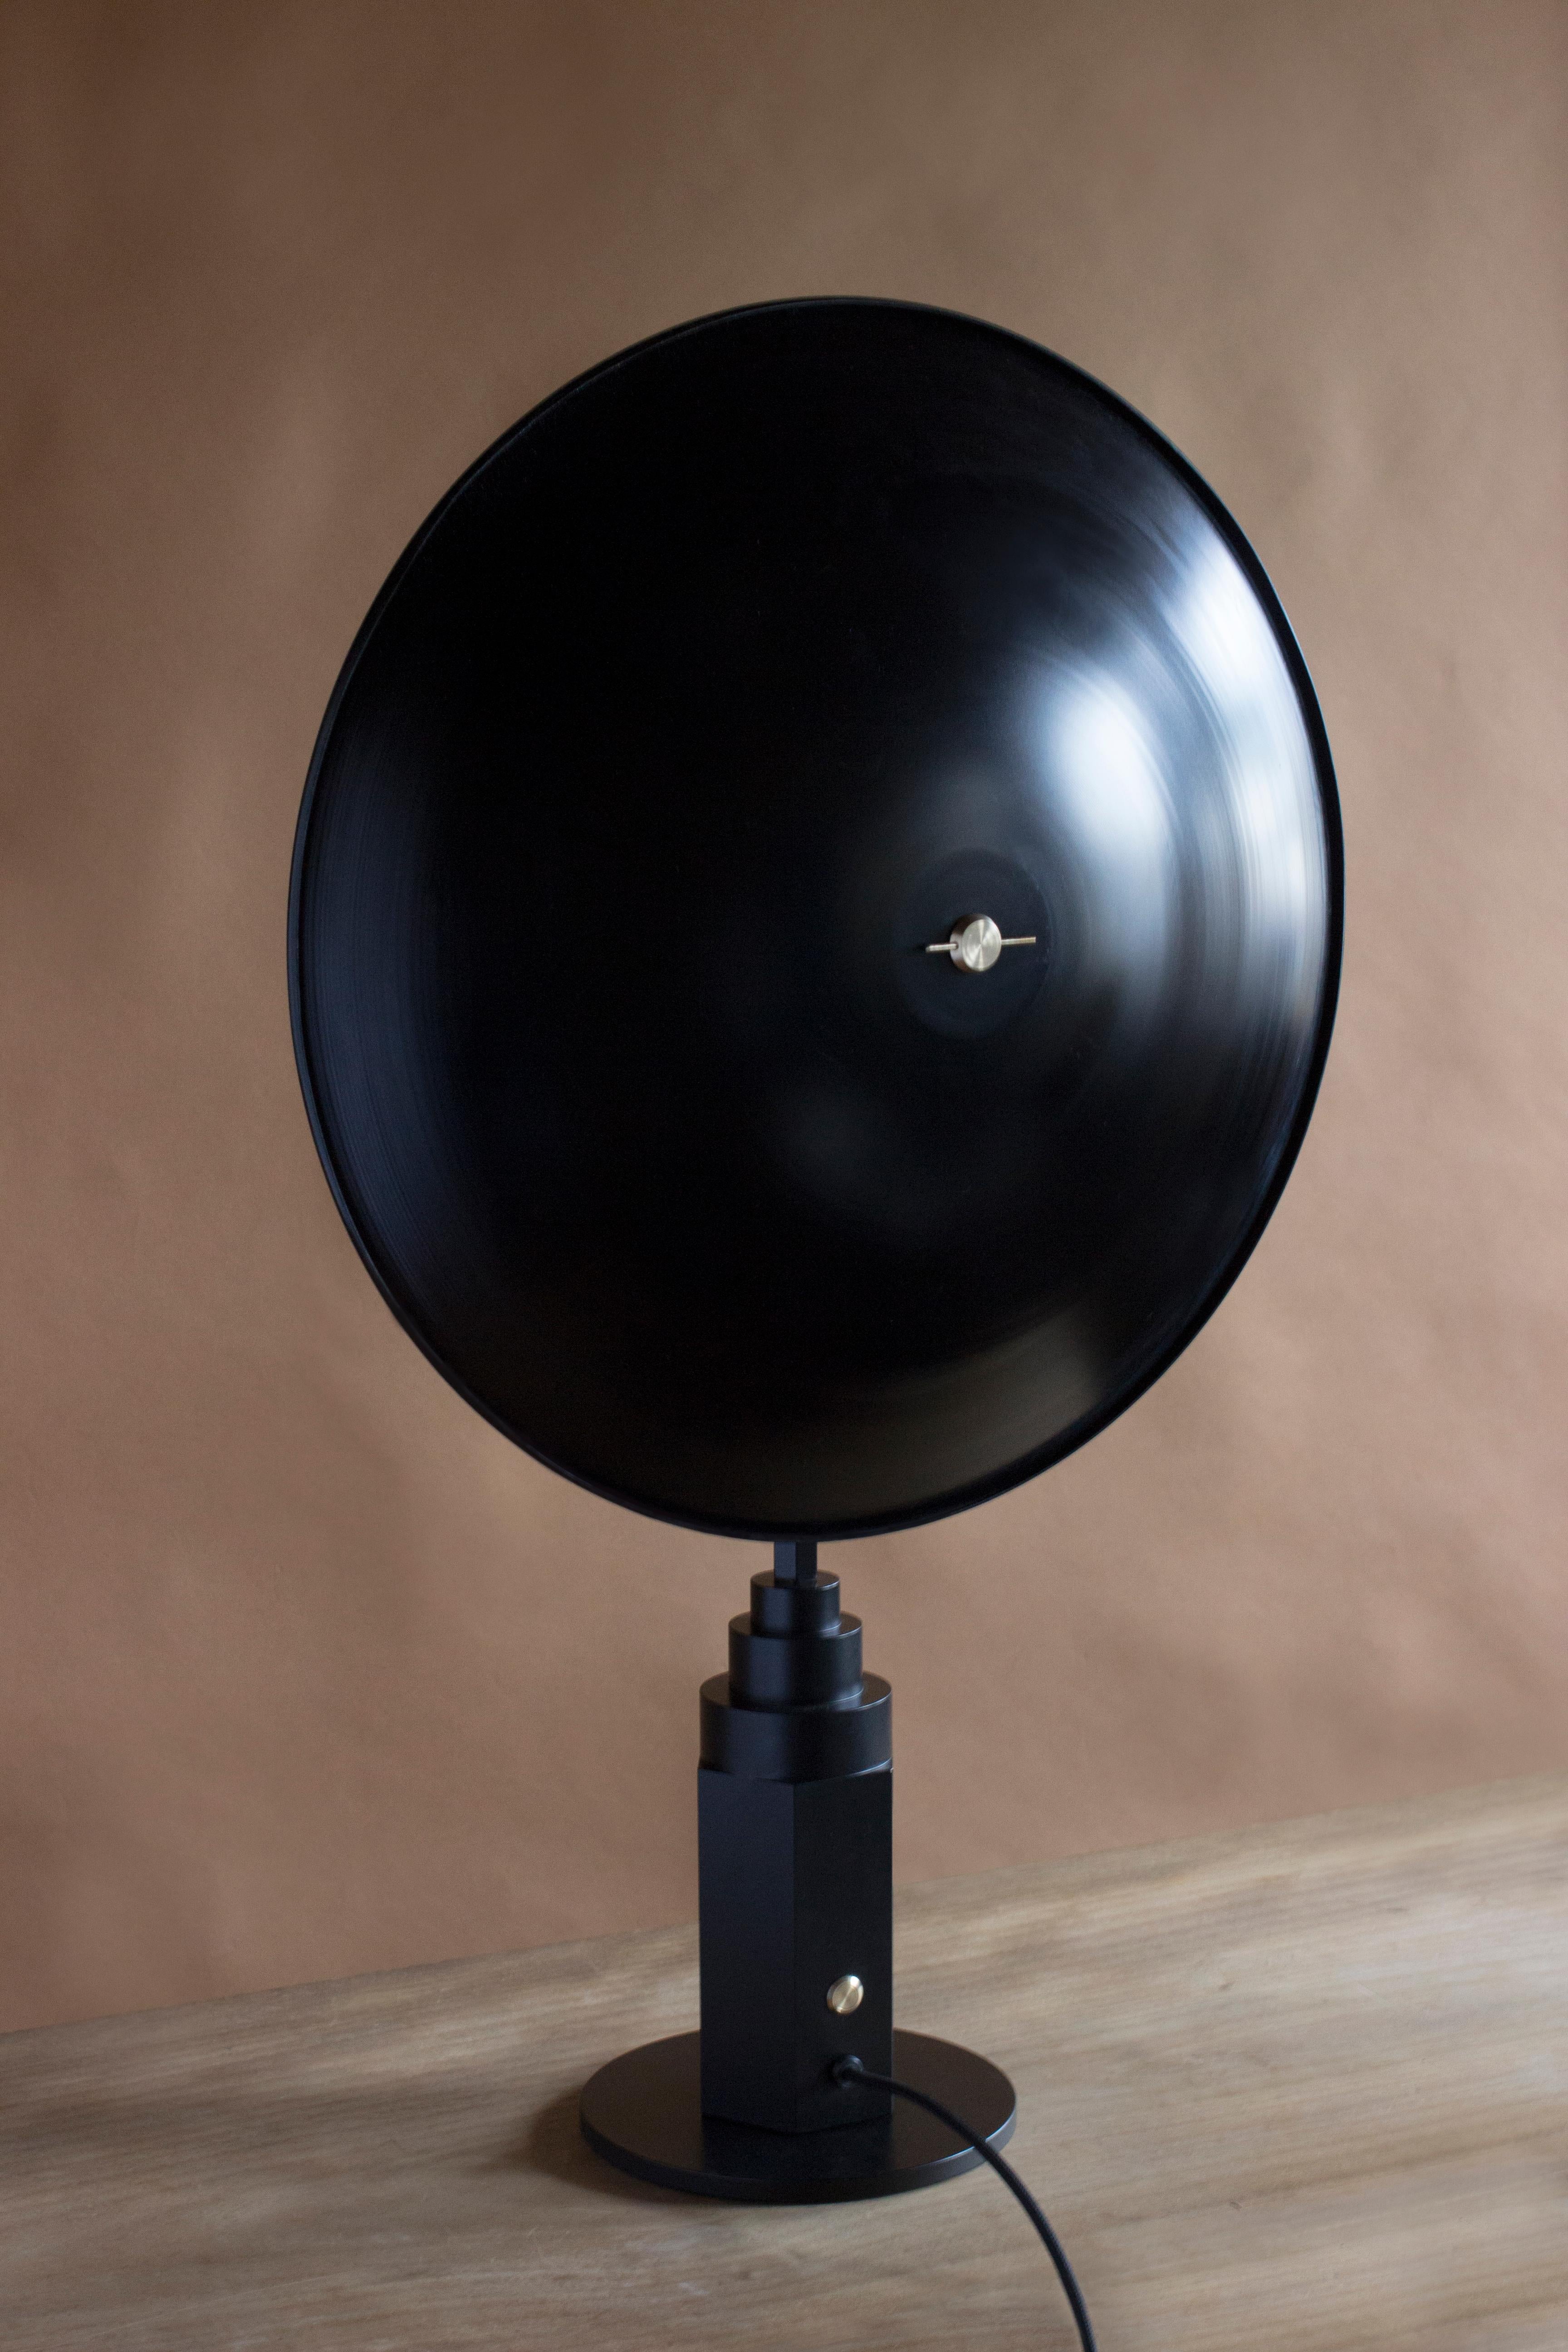 Metropolis Noir, brass limited edition table lamp by Jan Garncarek
Dimensions: 81 x 52 x 25 cm
Material: brass
Hand-sculpted by Jan Garncarek.
Signed and Numbered, limited edition of 25

Information:
weight:15 kg / 33 lb
voltage: 120V,